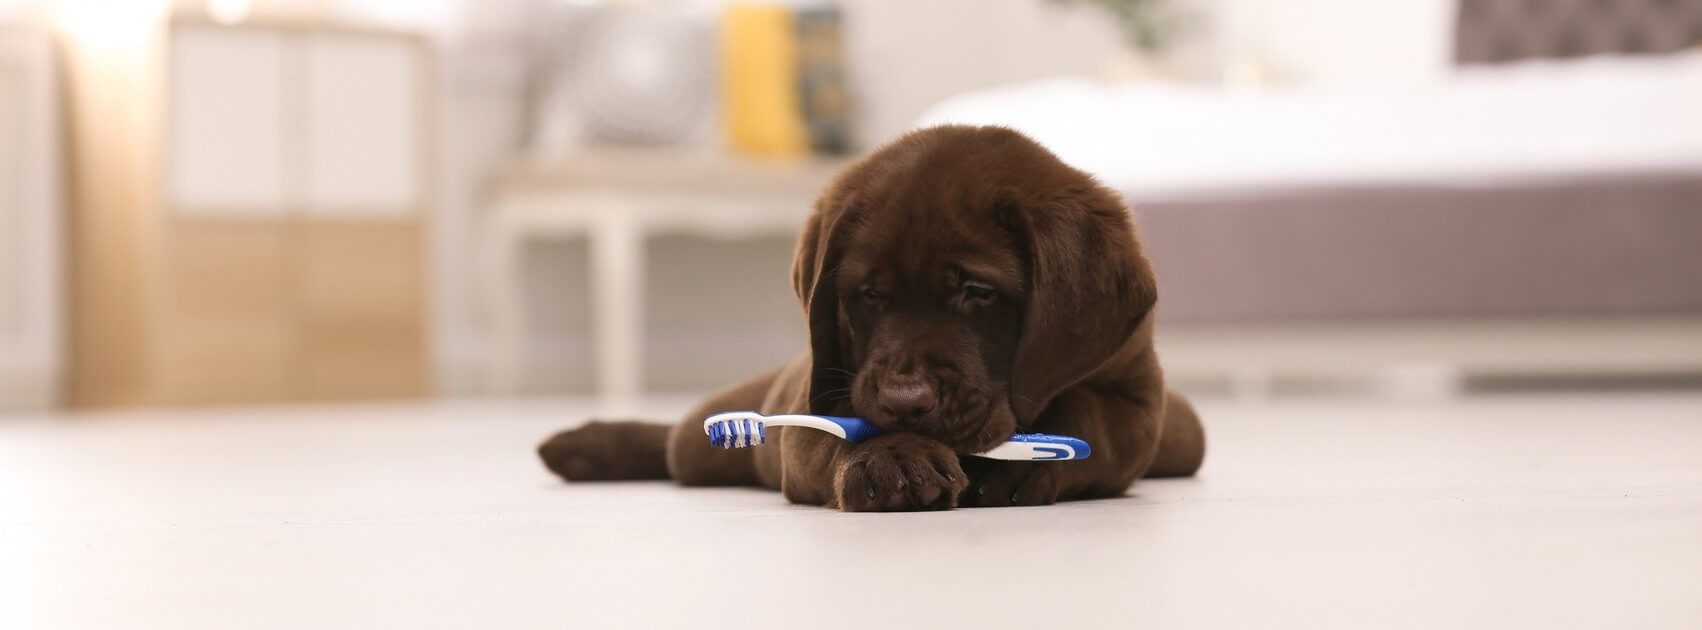 National Pet Dental Health Month: Why Good Oral Health Is Important